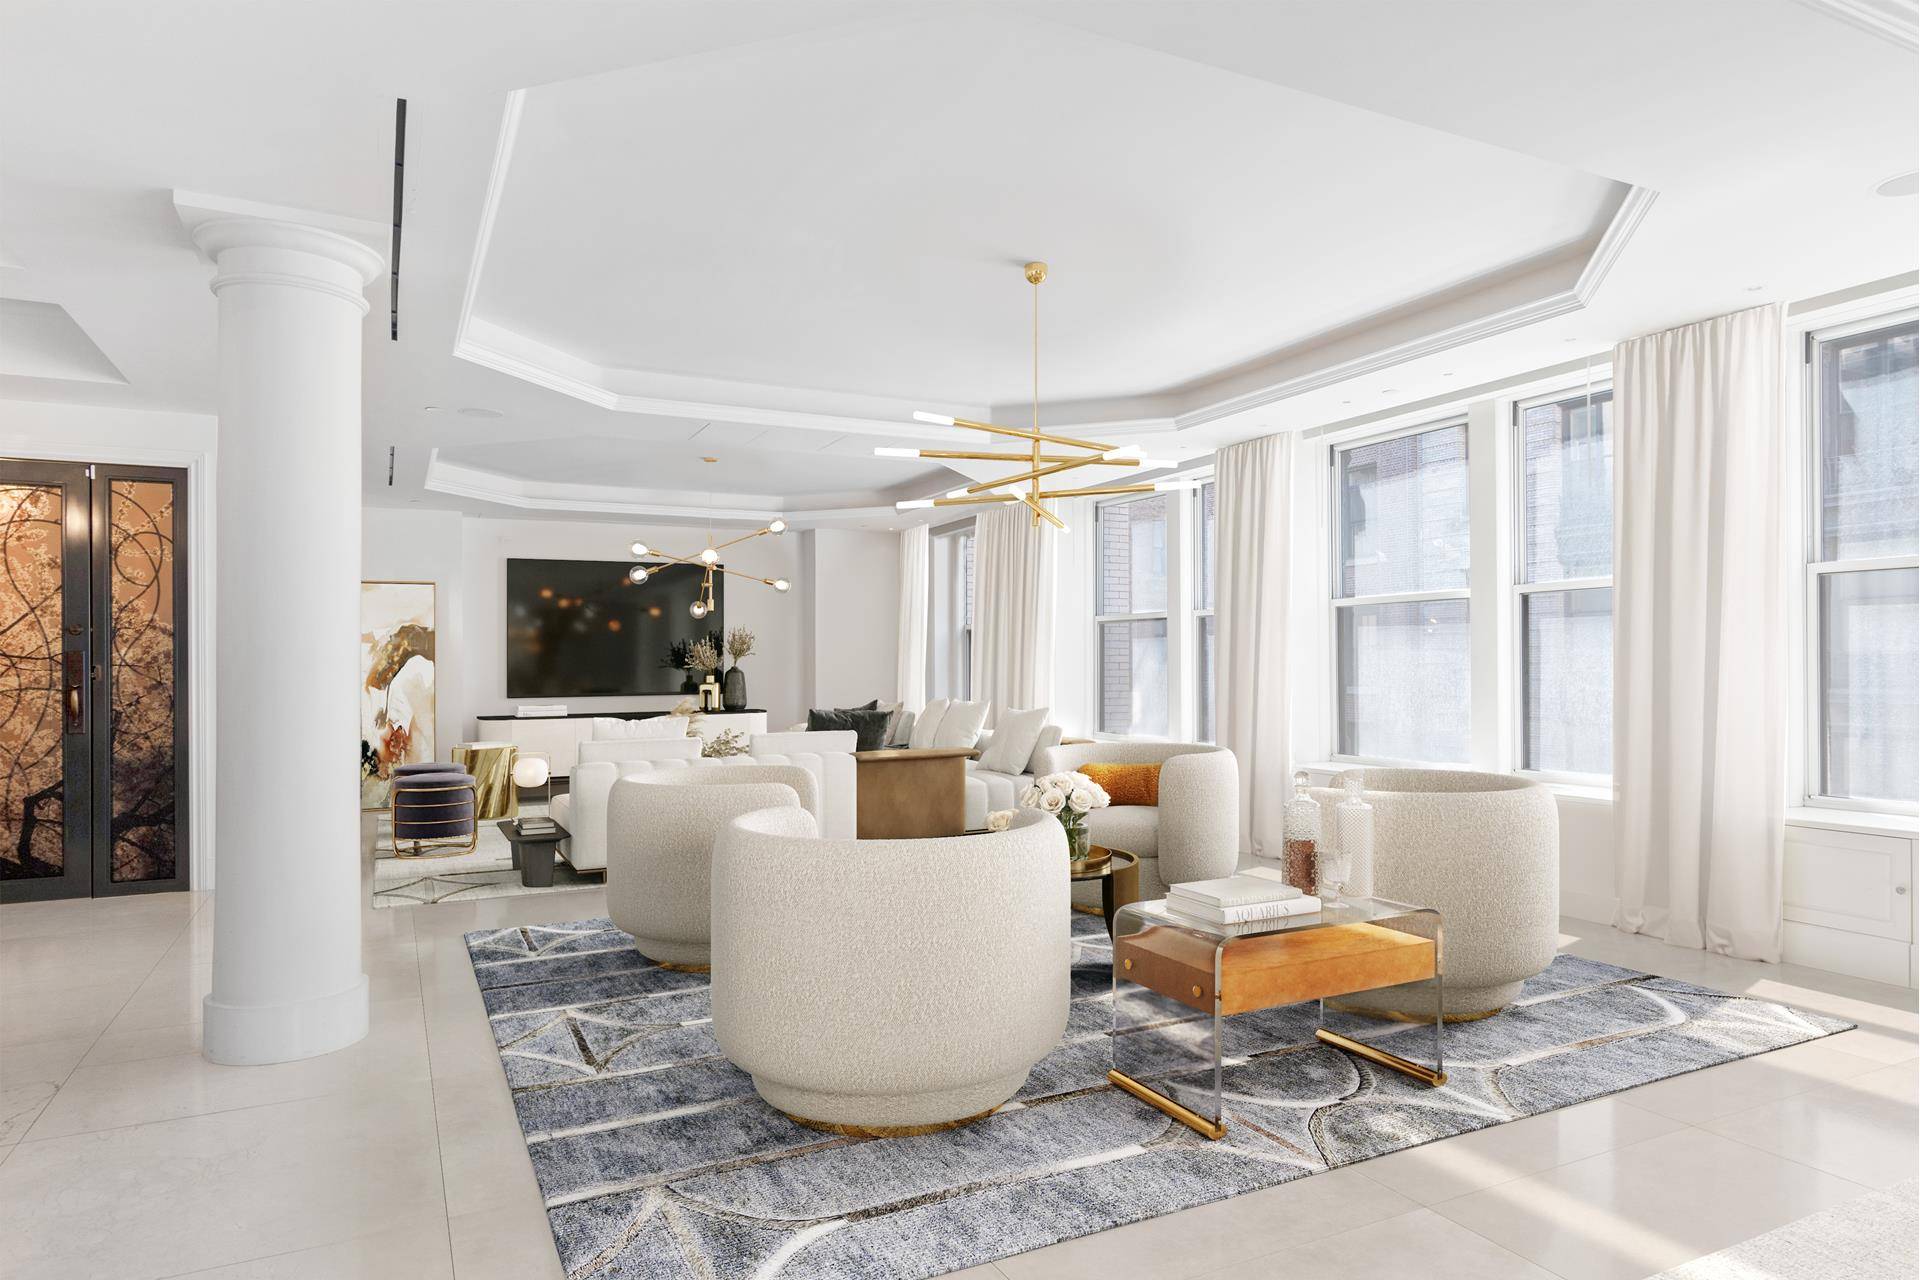 Residence 6 at 17 West 17th Street is an opulent and extremely spacious 4 bedroom 4BR 4.